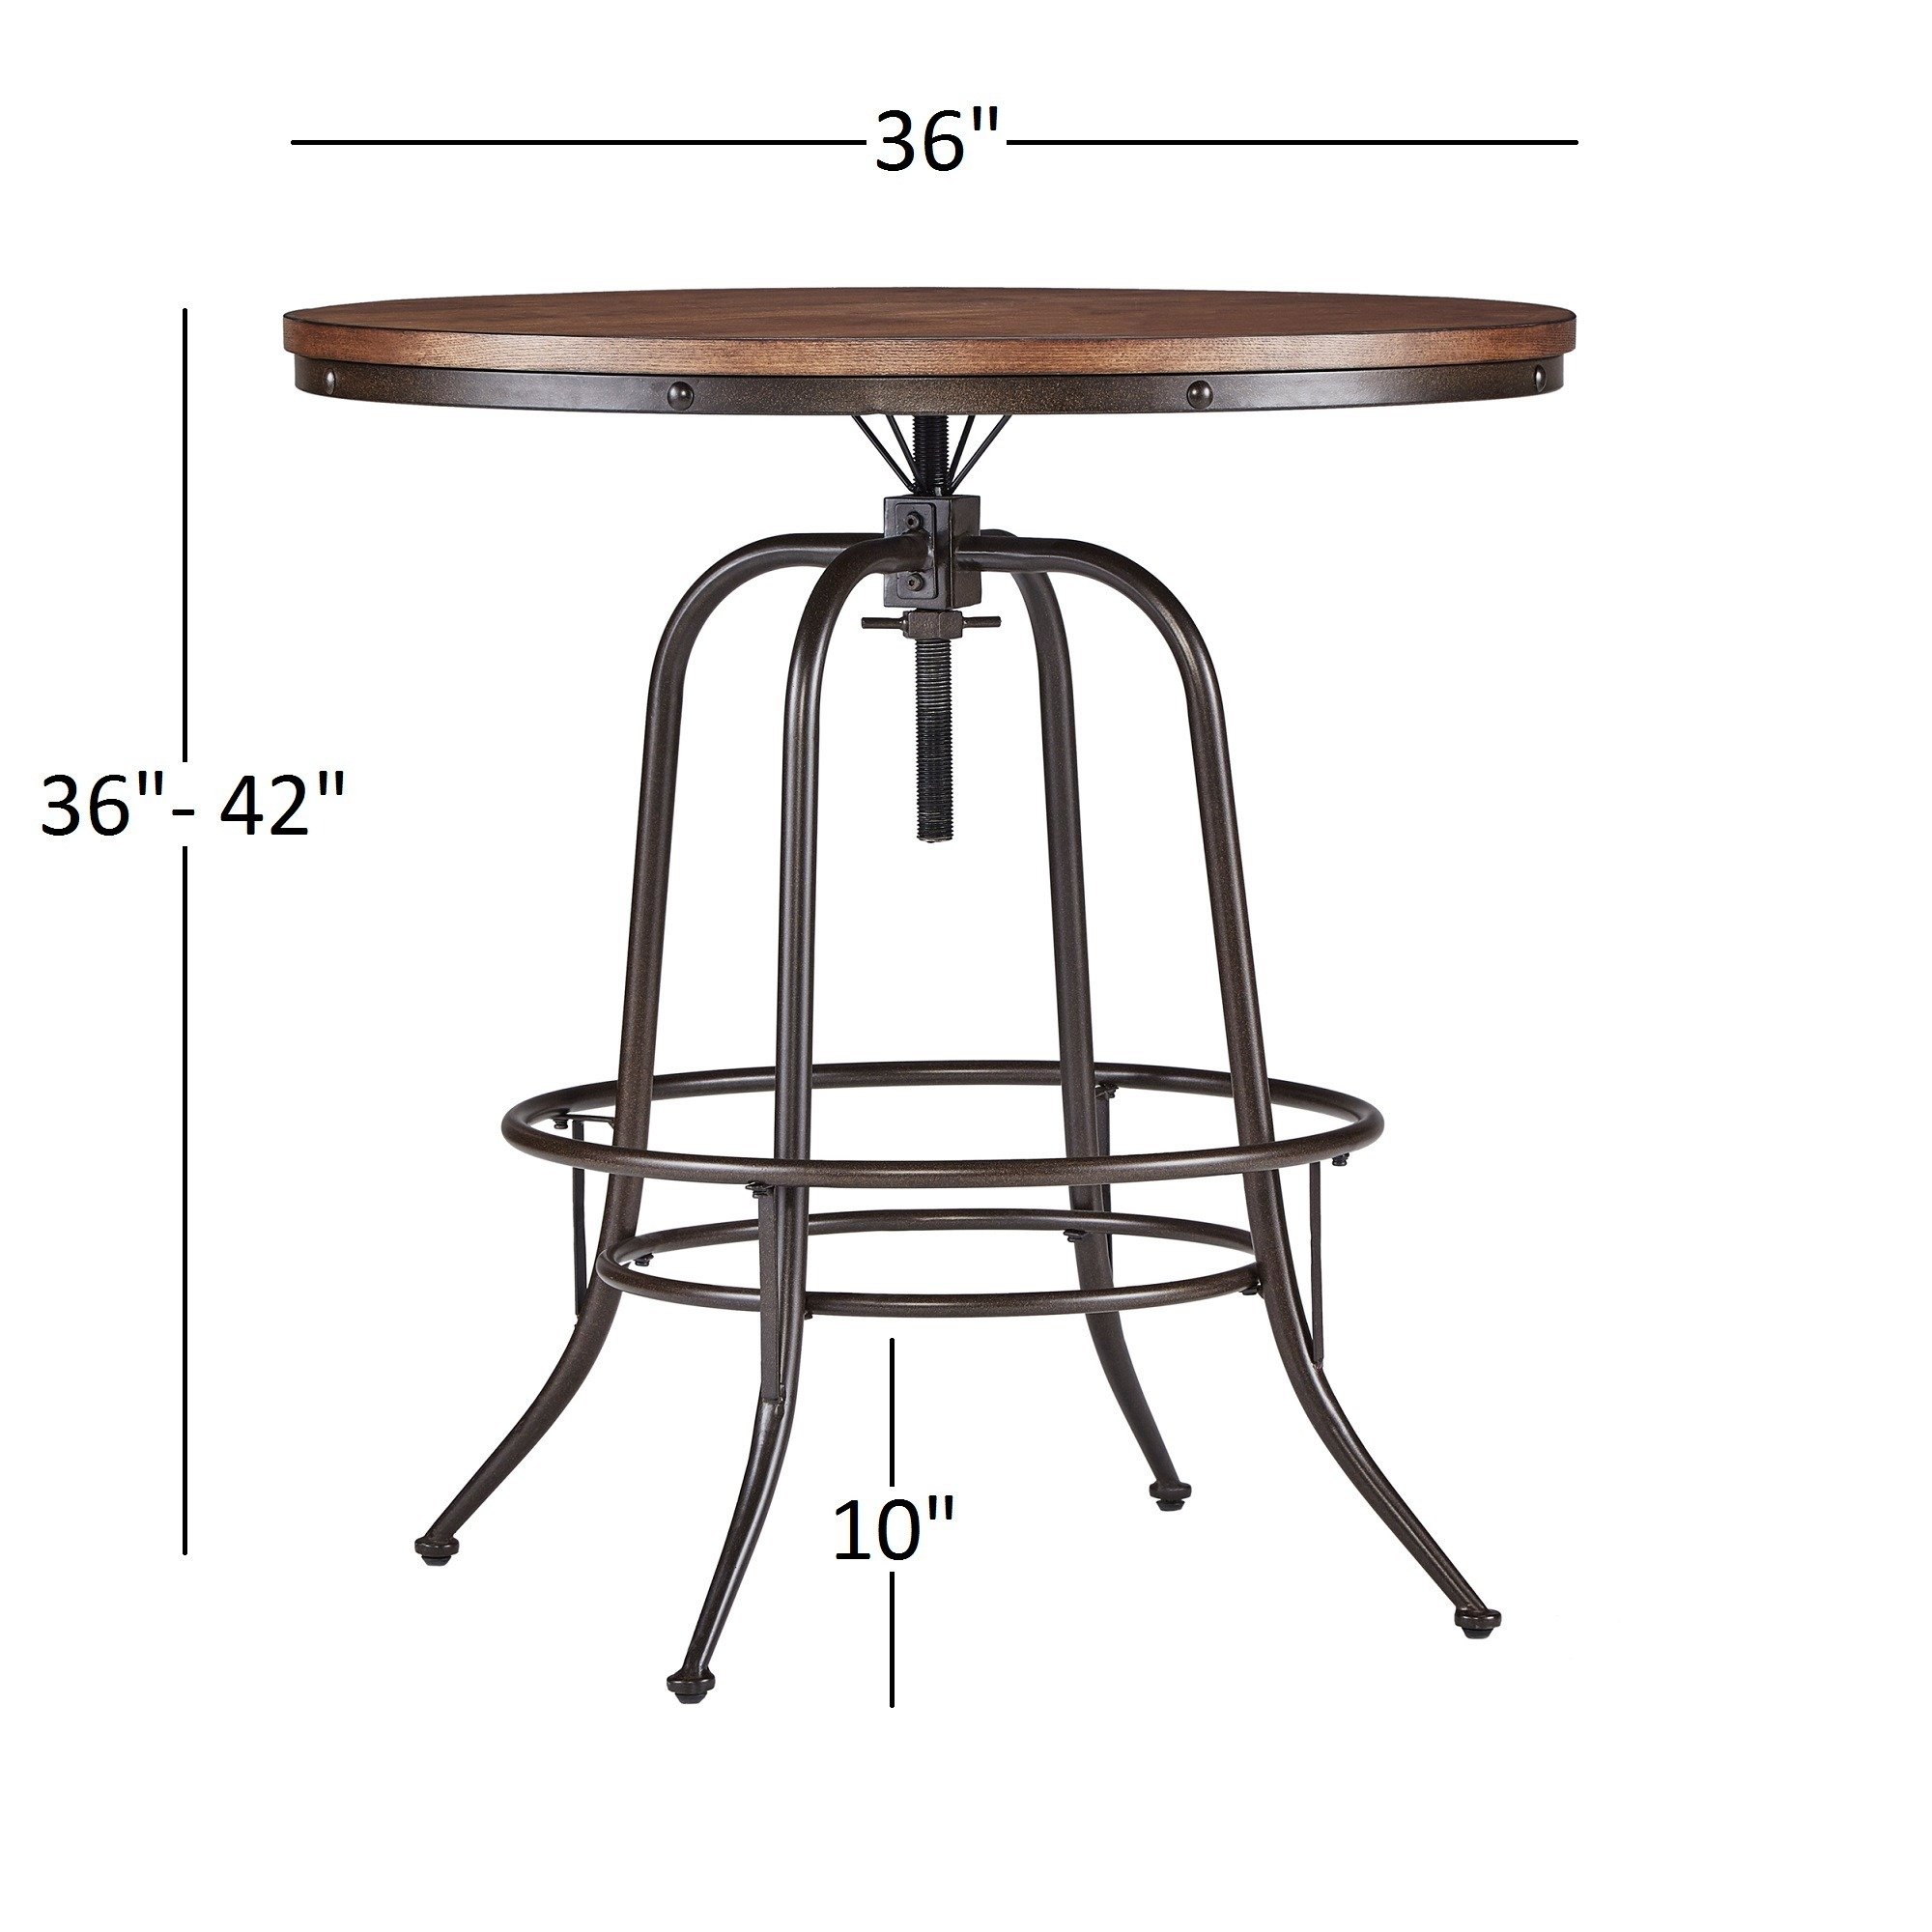 berwick iron industrial round inch adjustable counter height table tribecca home accent inspire classic free shipping today modern furniture edmonton ikea boxes for cube storage